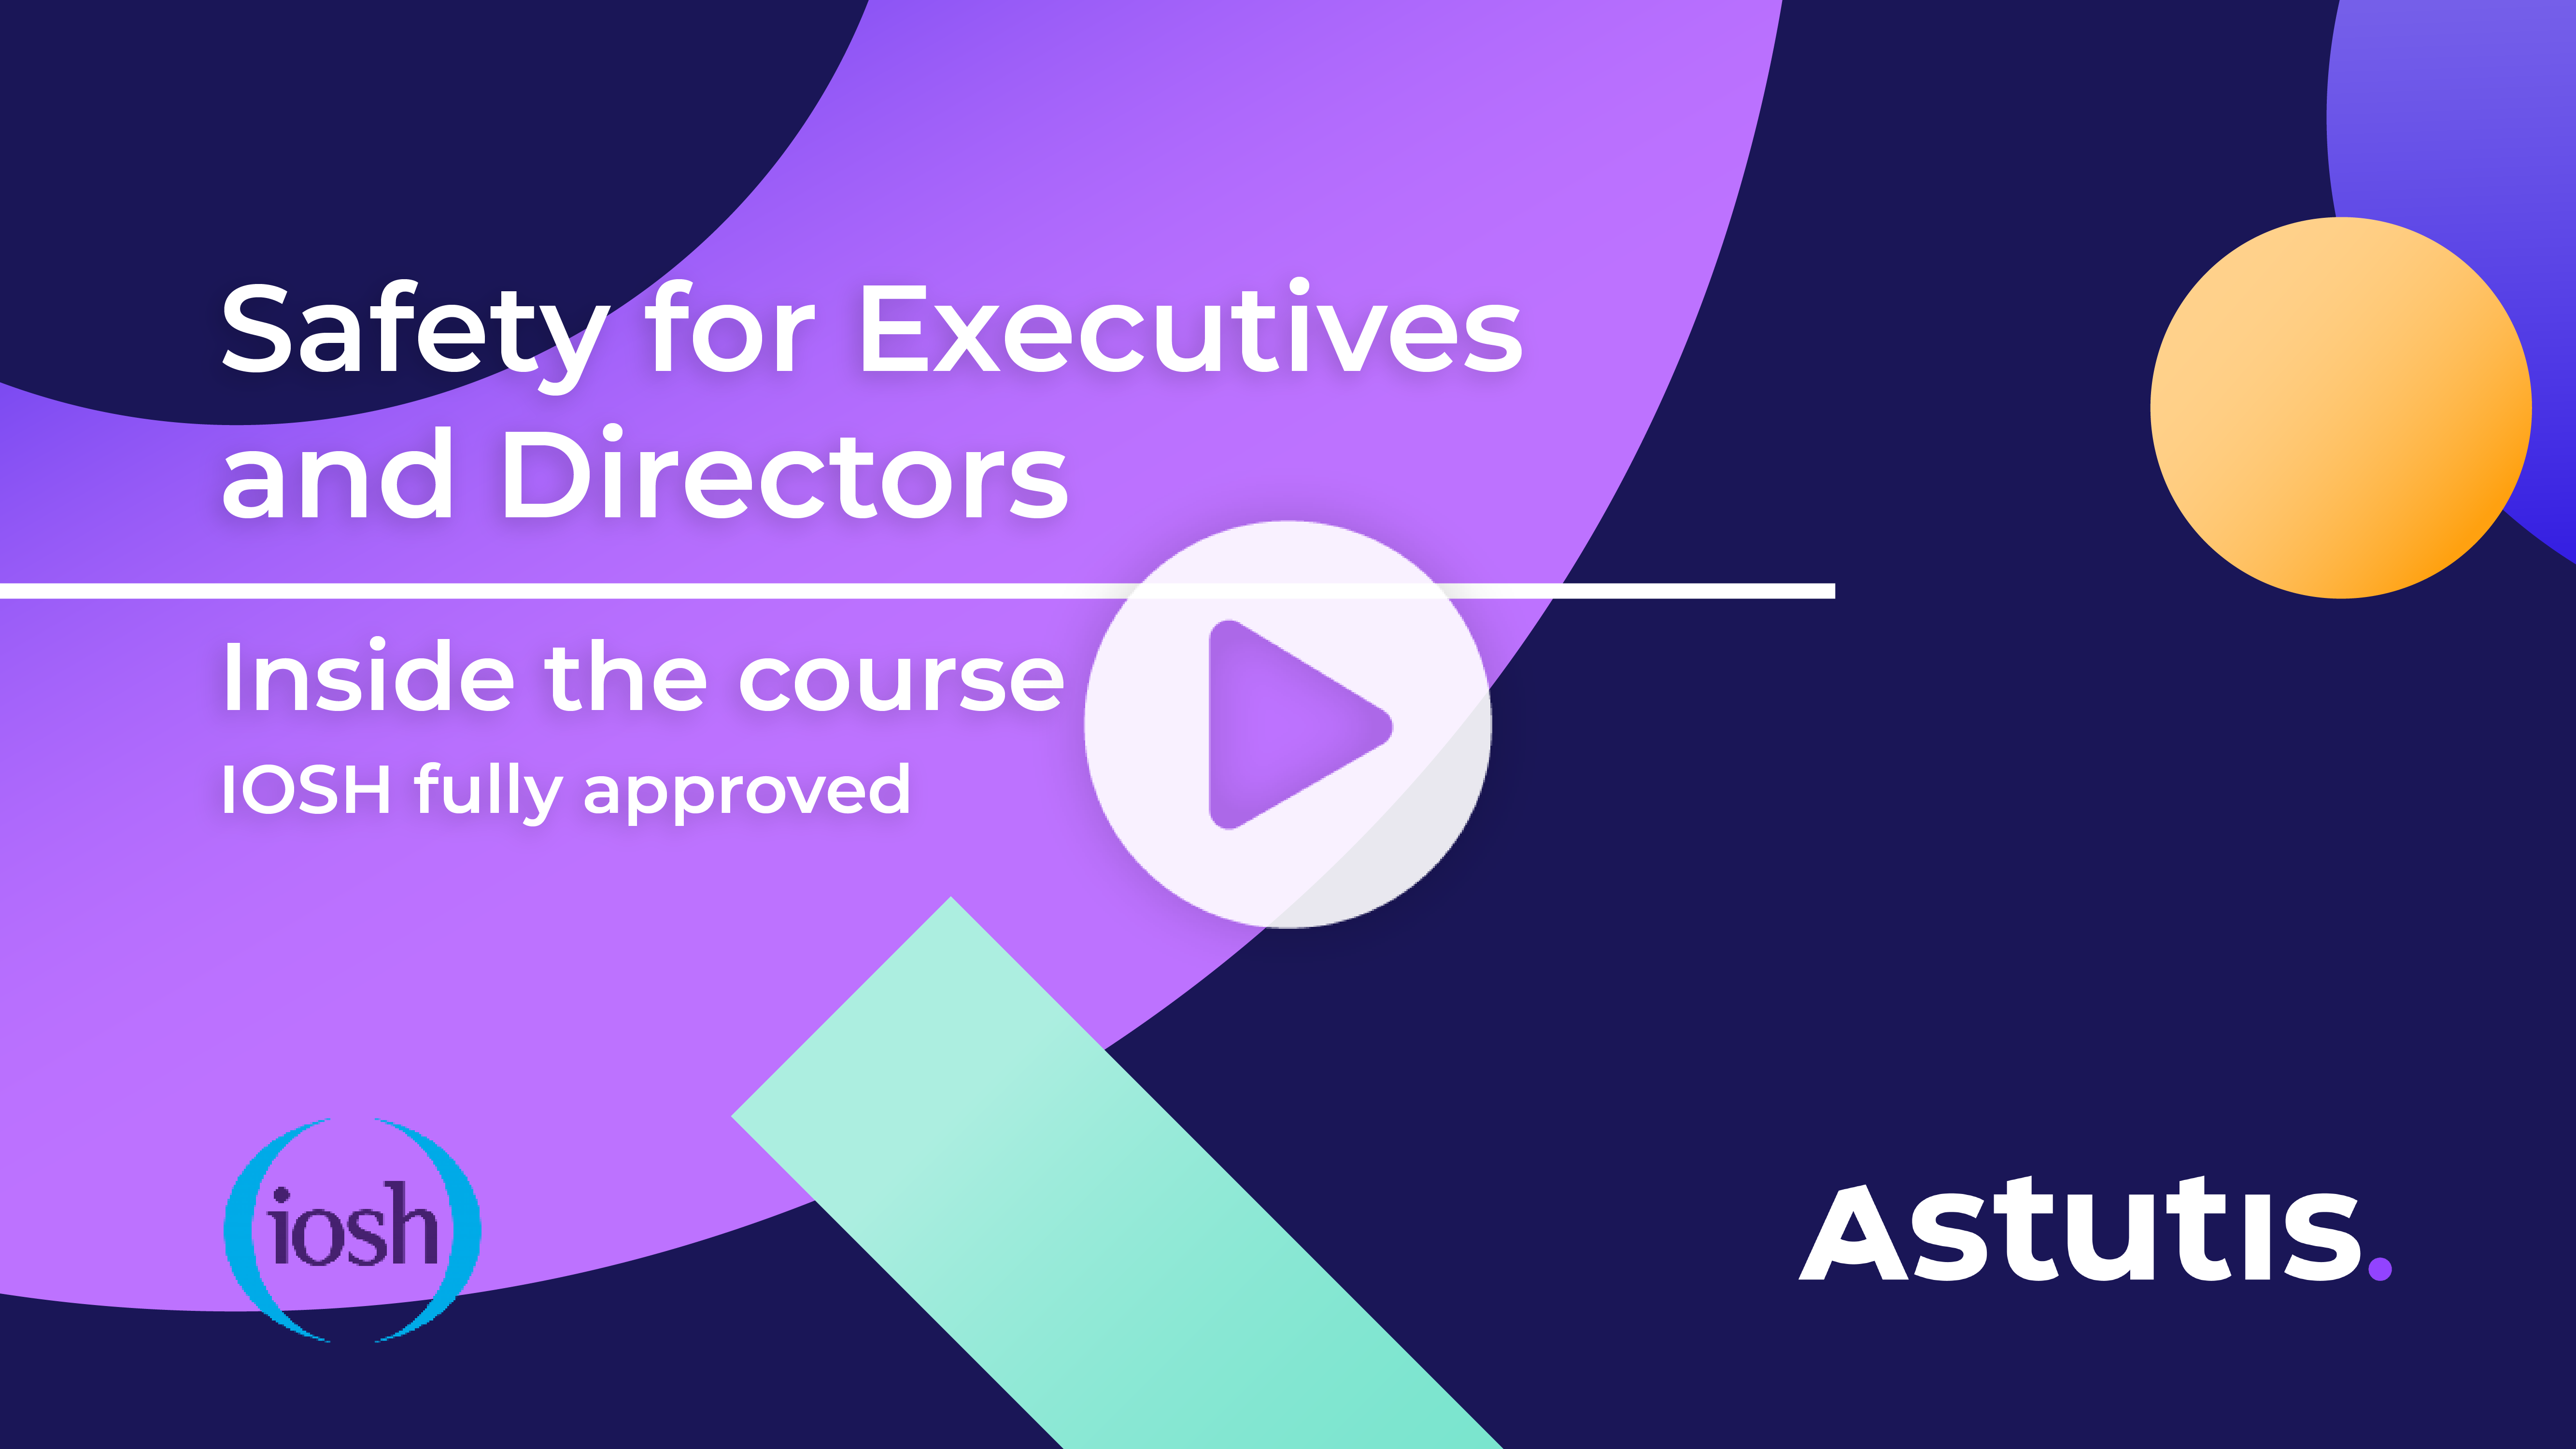 The IOSH Safety for Executives and Directors Online course - Inside the course preview